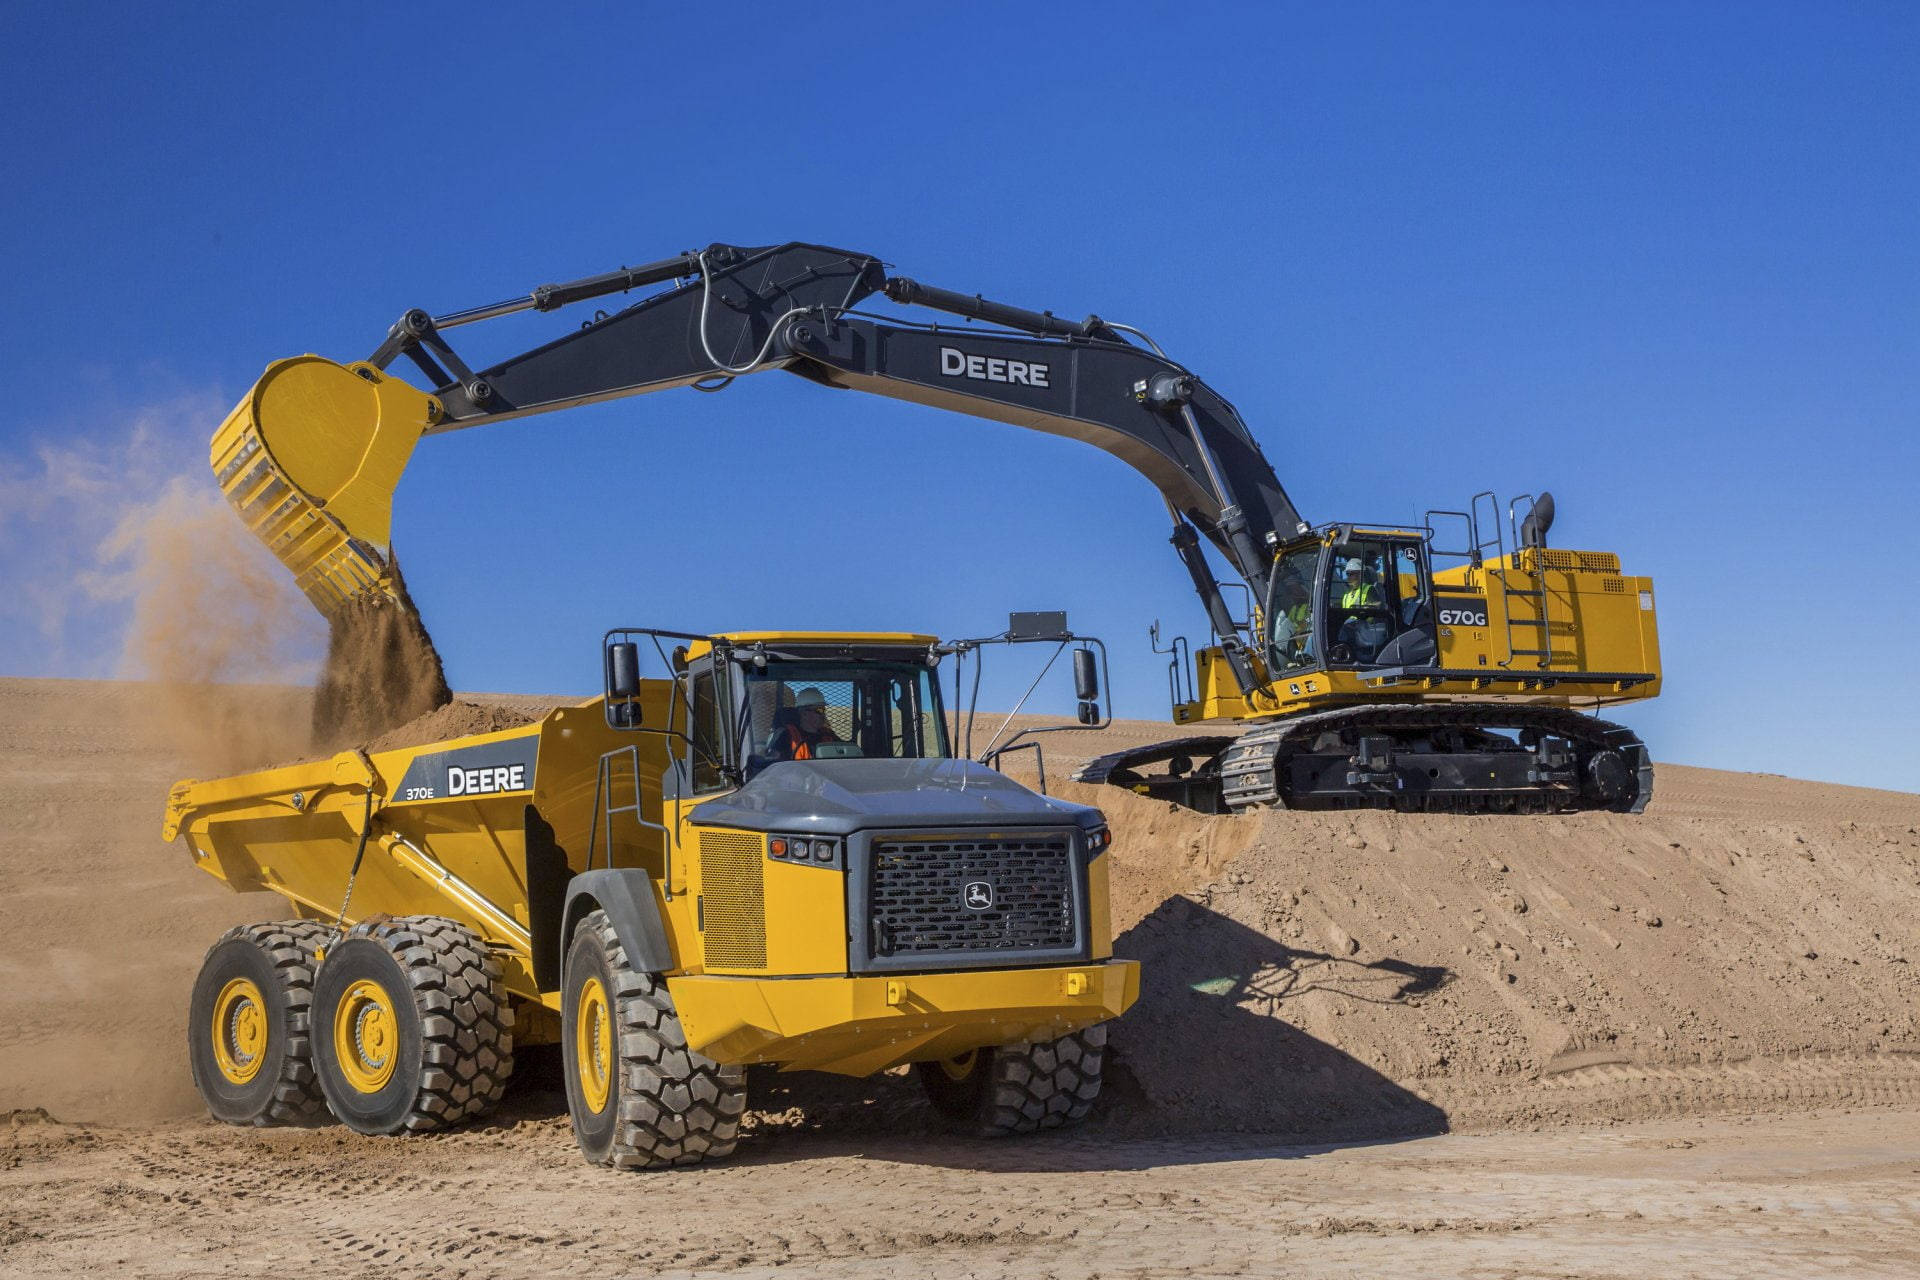 A Powerful John Deere Dump Truck And Excavator Working On A Construction Site Background